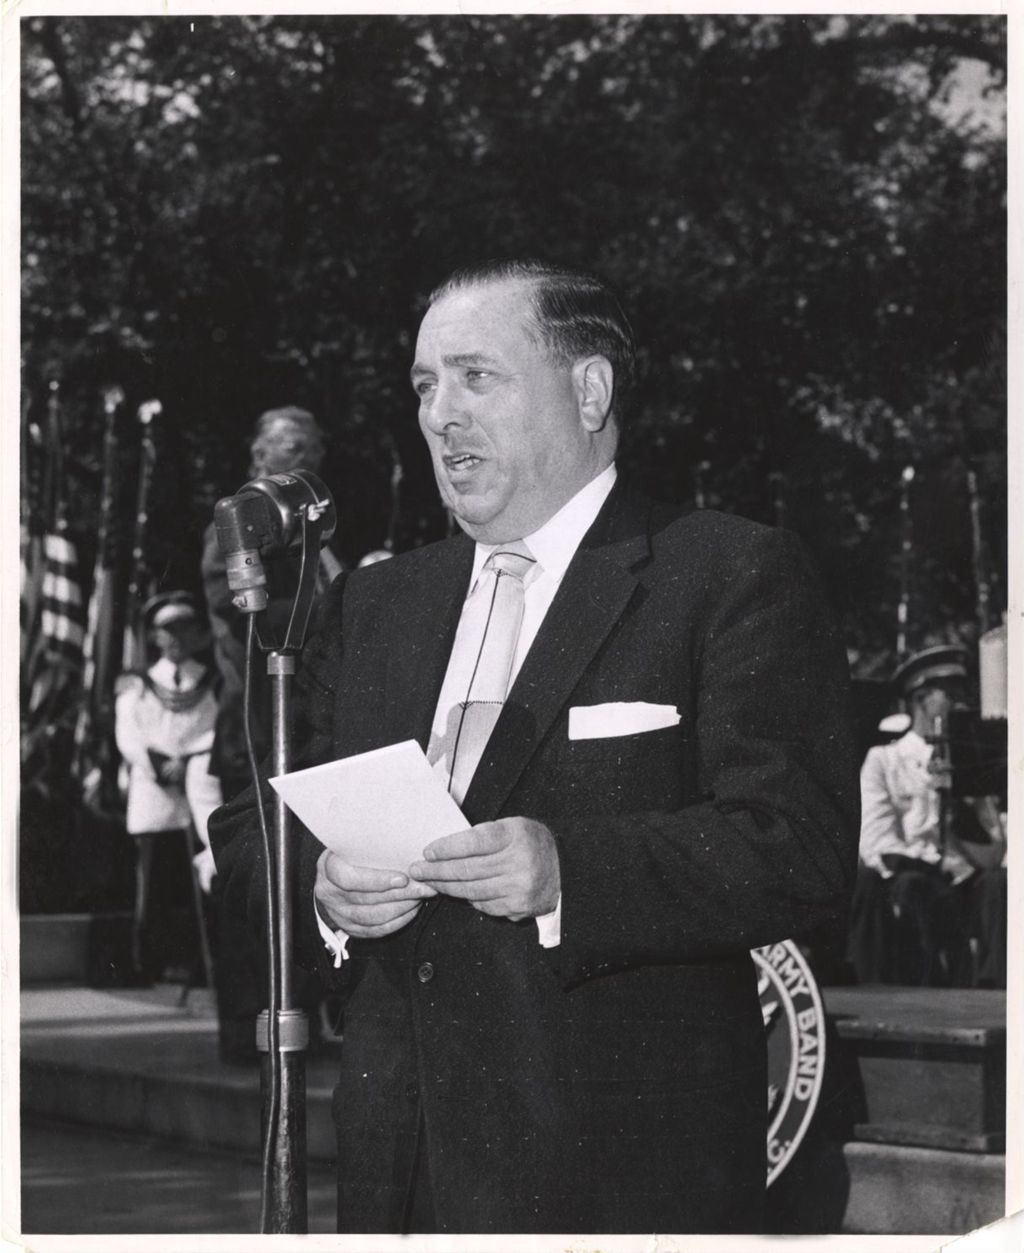 Miniature of Richard J. Daley speaking at an outdoor event